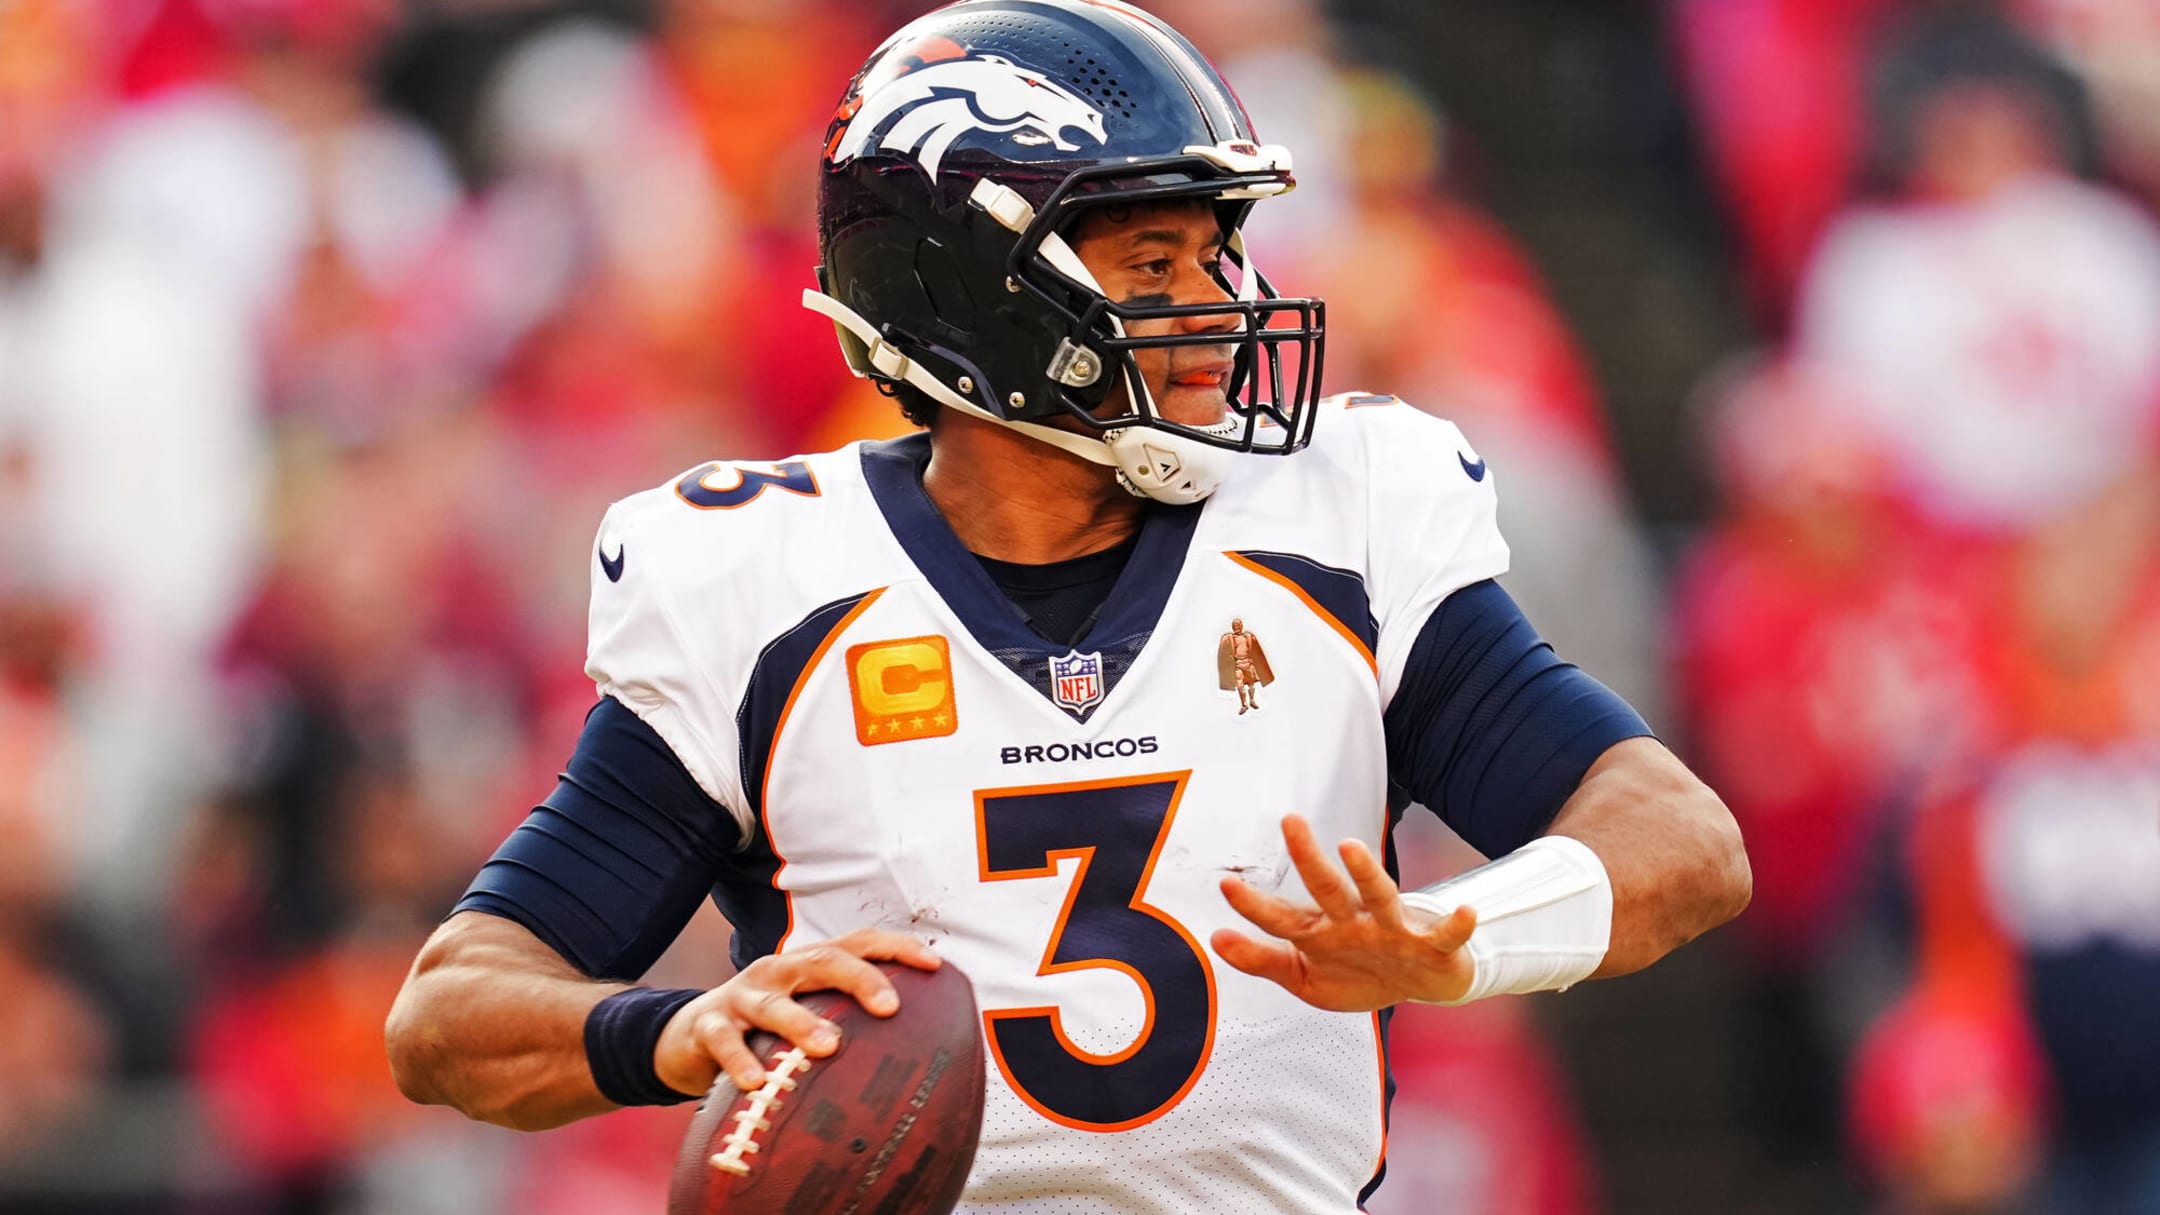 NFL on X: FINAL: @Broncos win in Russell Wilson's home debut